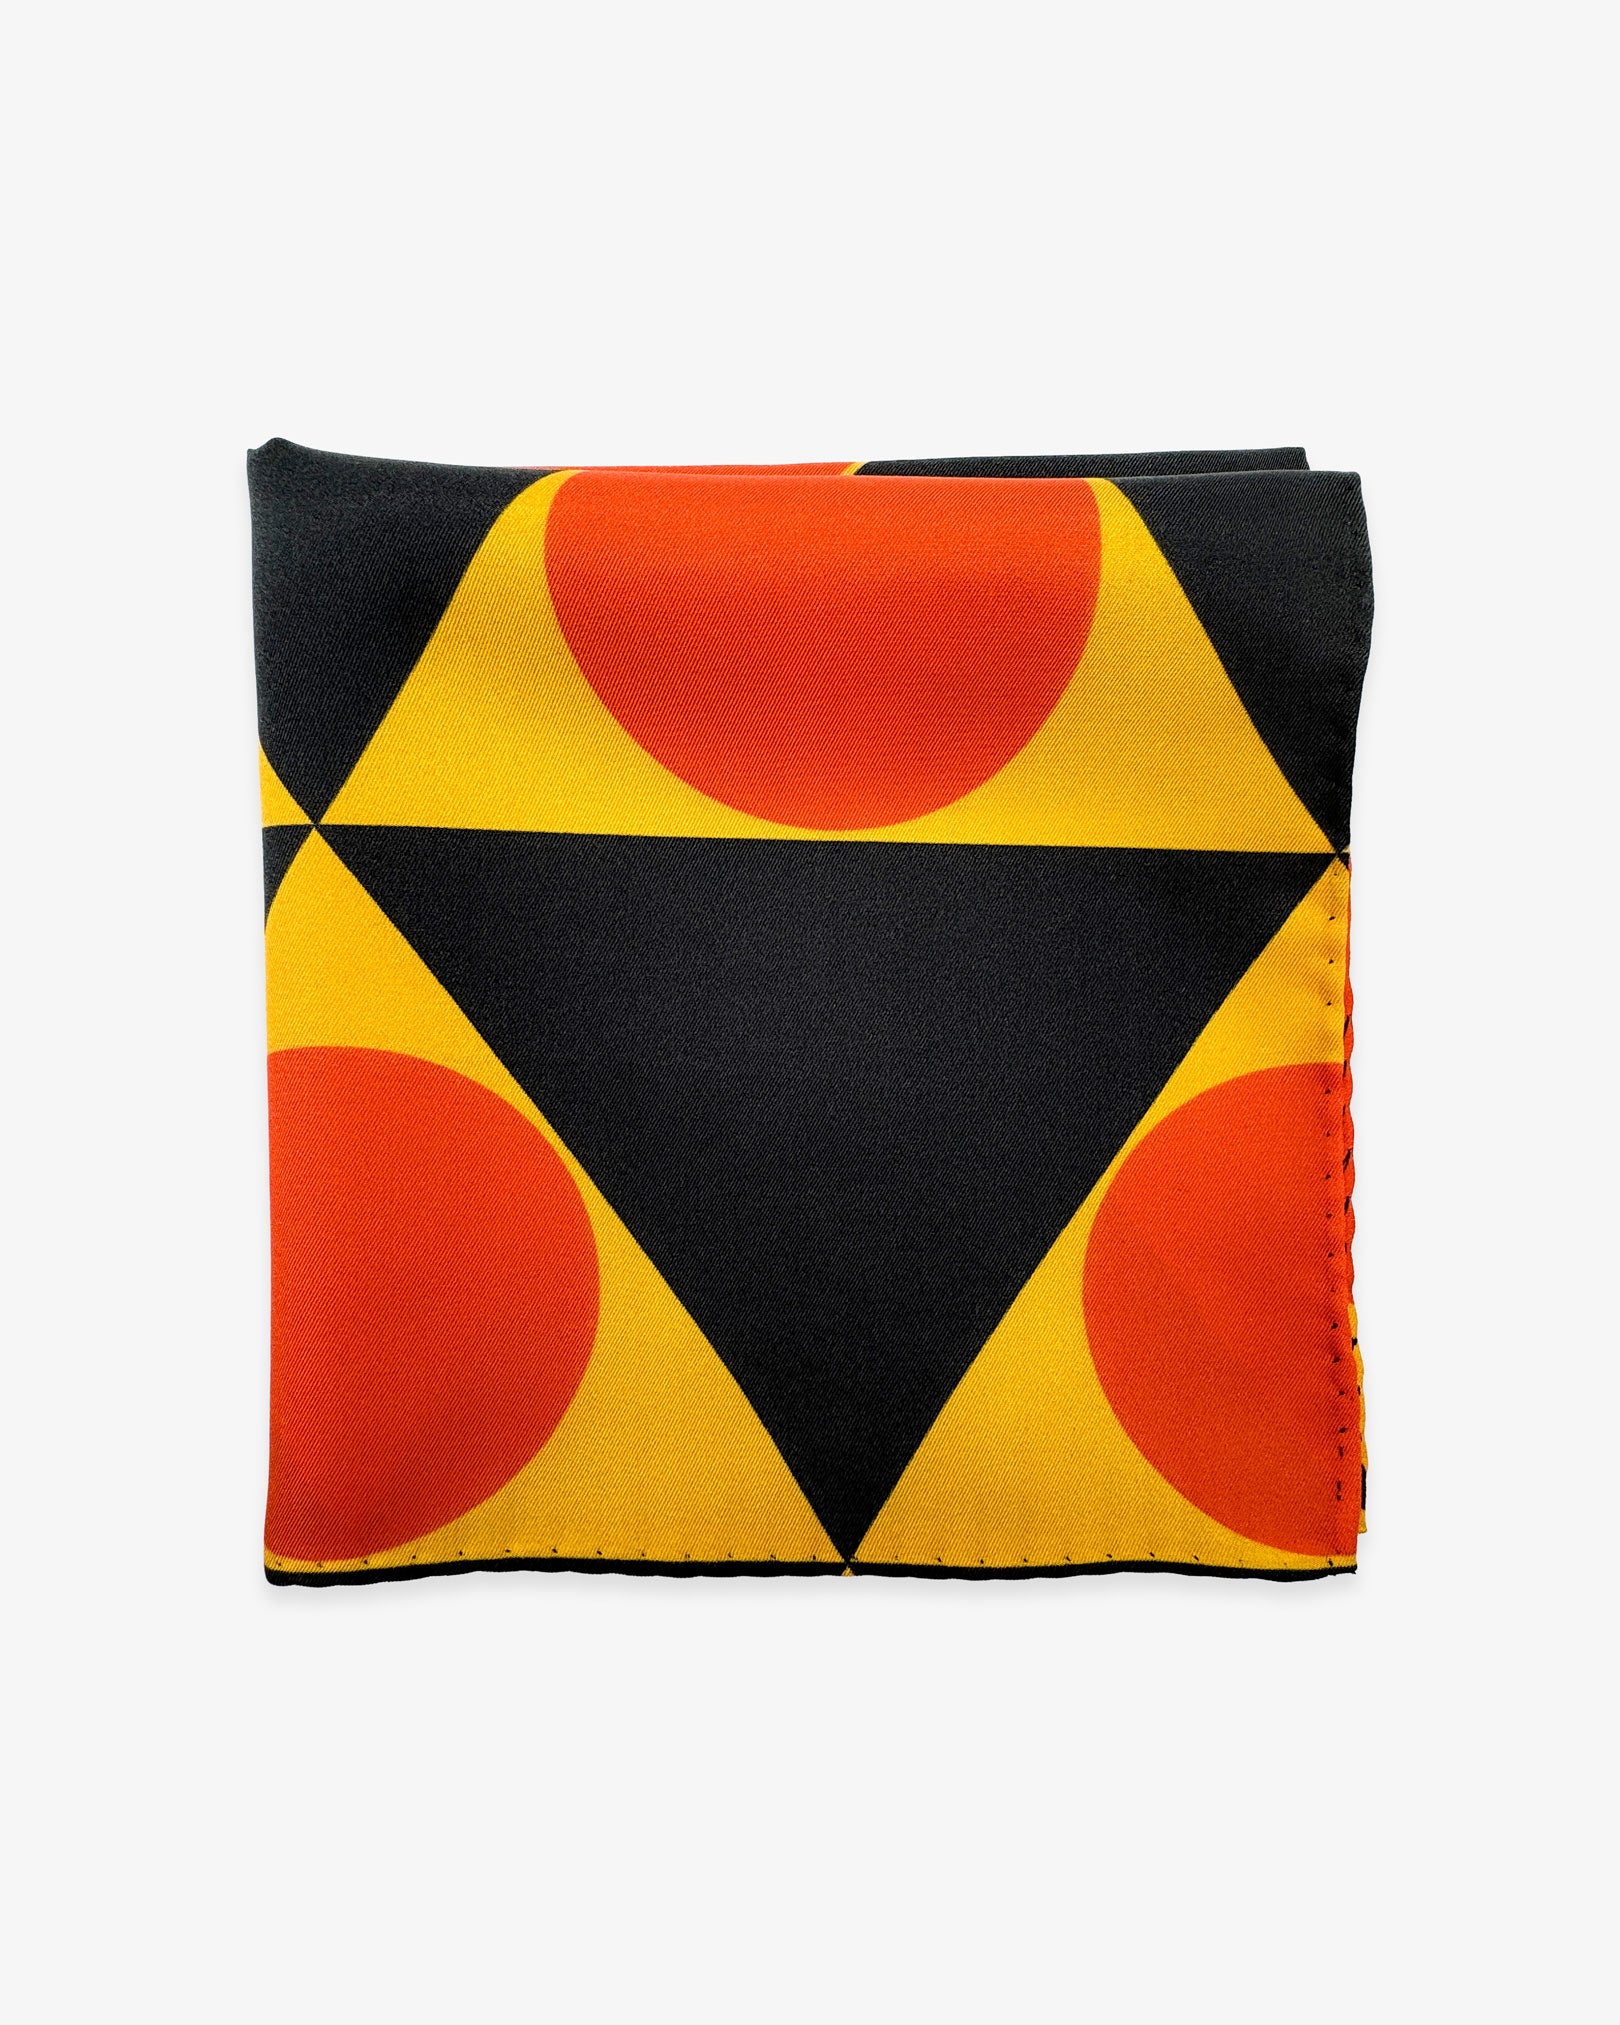 The 'Dresden' silk pocket square from SOHO Scarves folded into a quarter, showing a portion of the bauhaus-inspired triangular and circular repeat patterns.